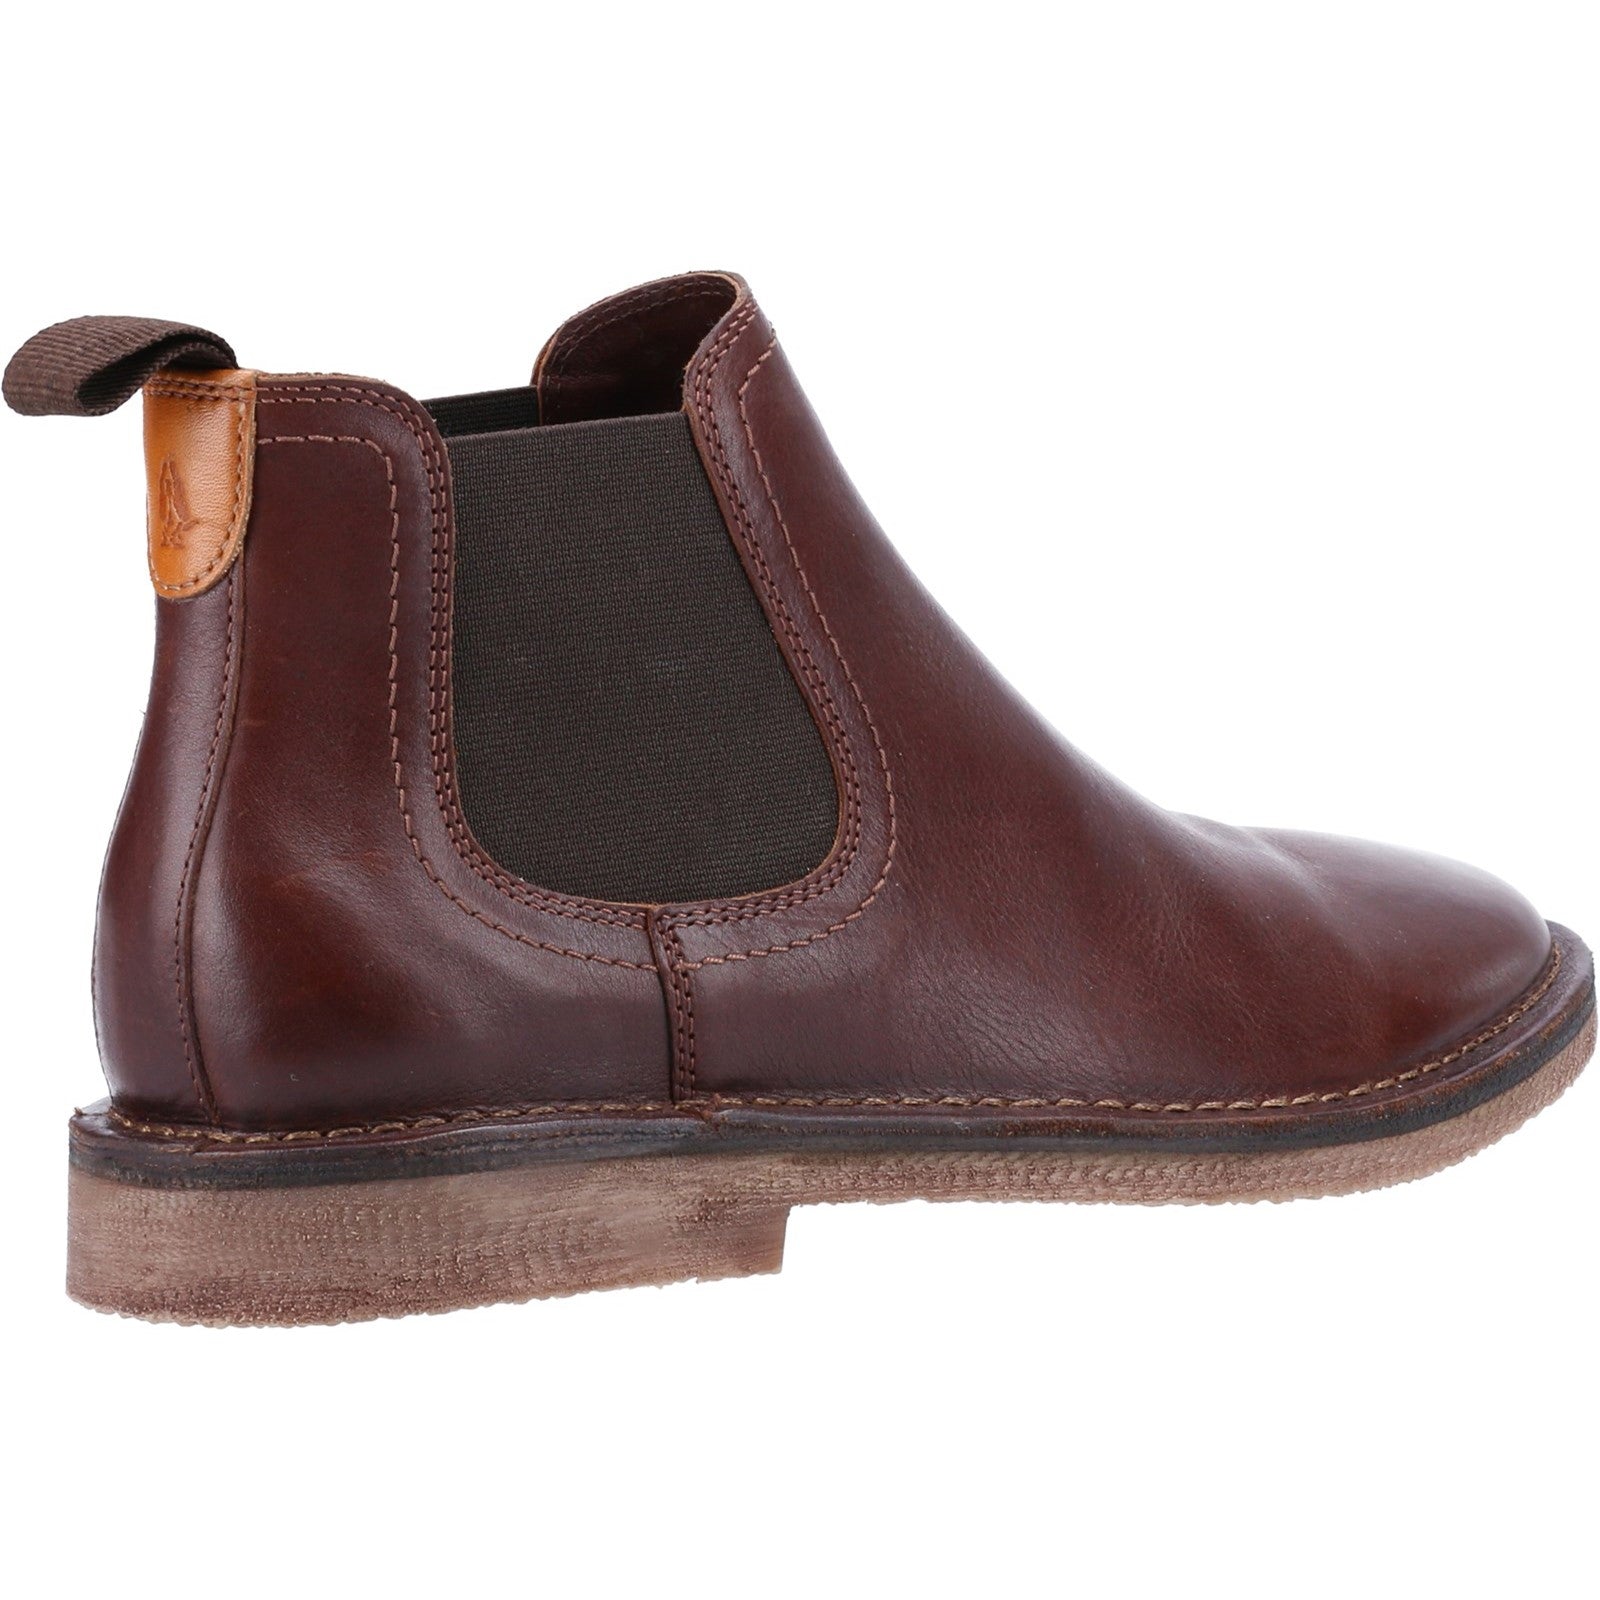 Hush Puppies Mens Shaun Leather Chelsea Boots - Brown